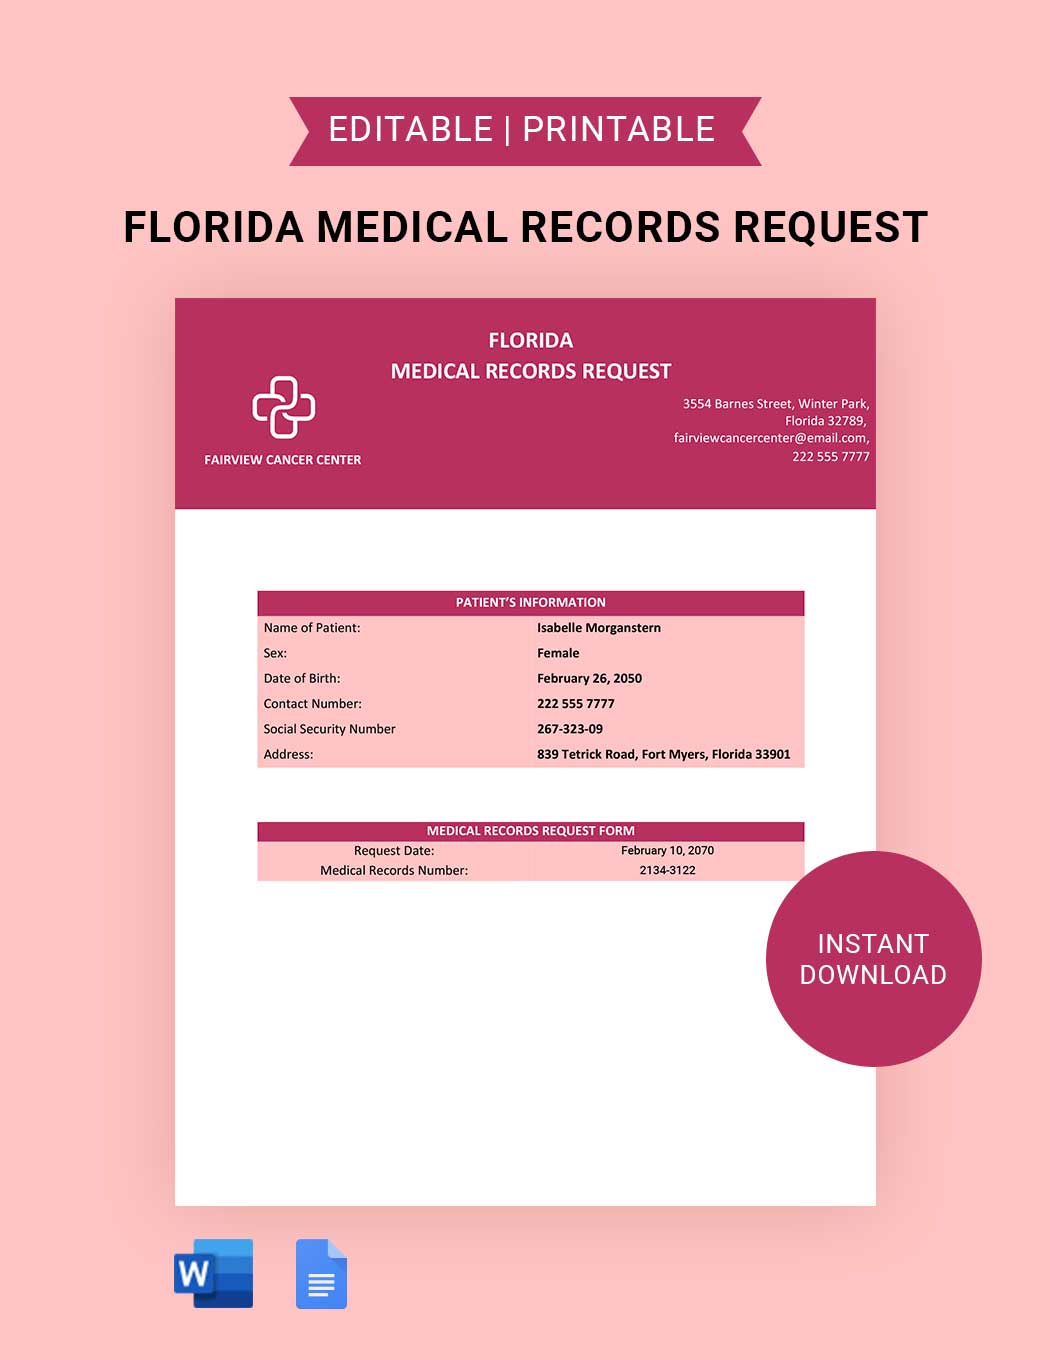 Florida Medical Records Request Template in Word, Google Docs